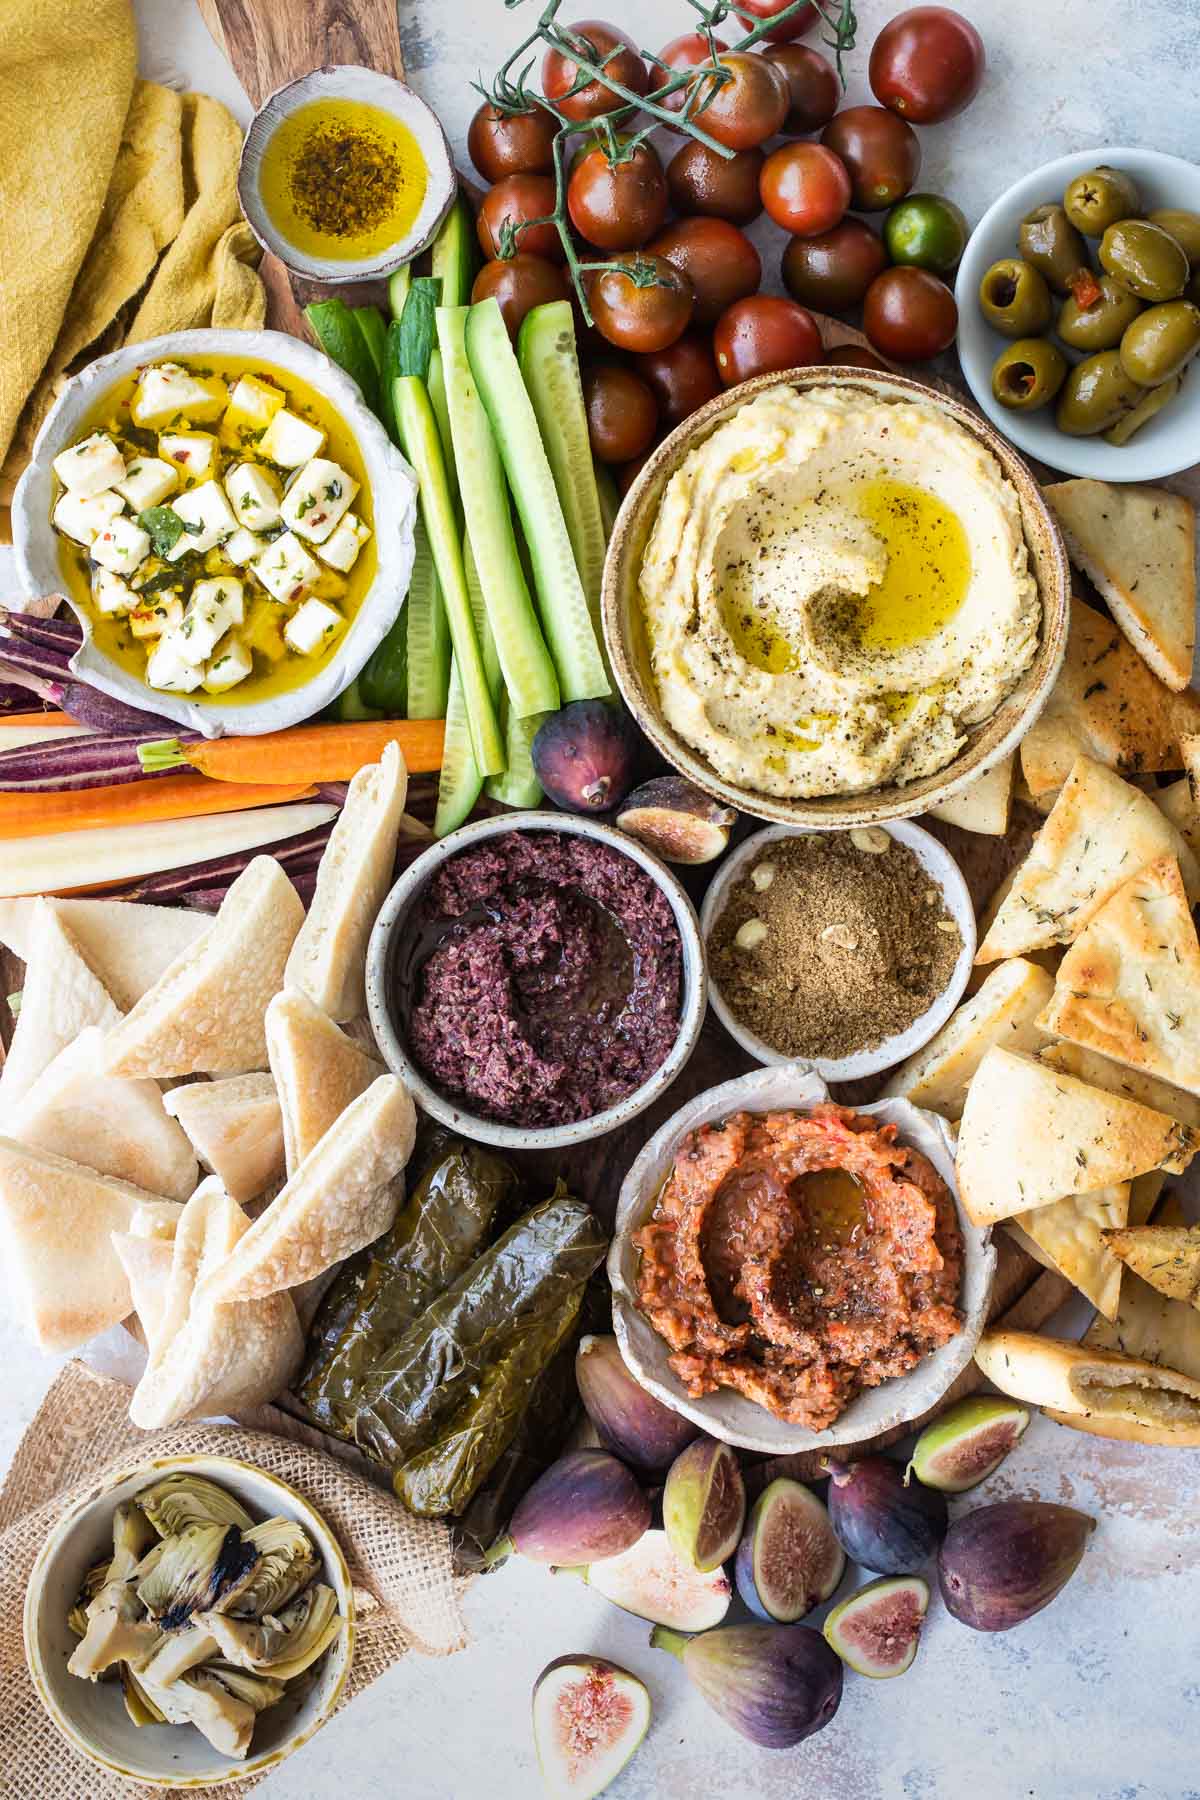 Dukkah, eggplant dip, hummus, artichokes, and olives in bowls with tomatoes, pita chips, pita bread, cucumbers and carrot sticks.